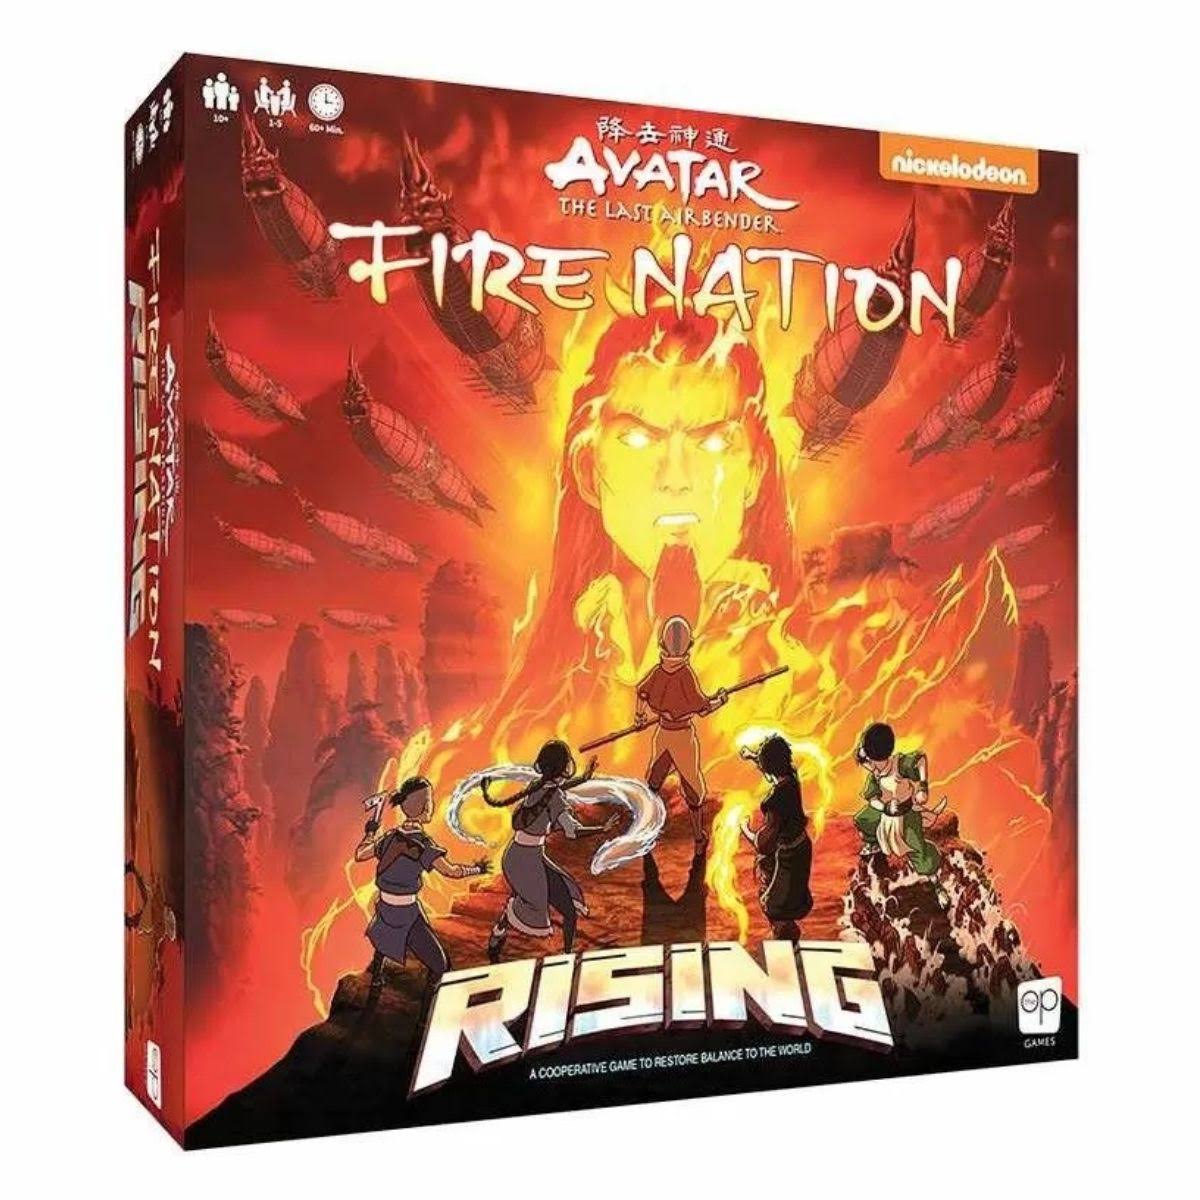 Avatar - The Last Airbender Fire Nation Rising